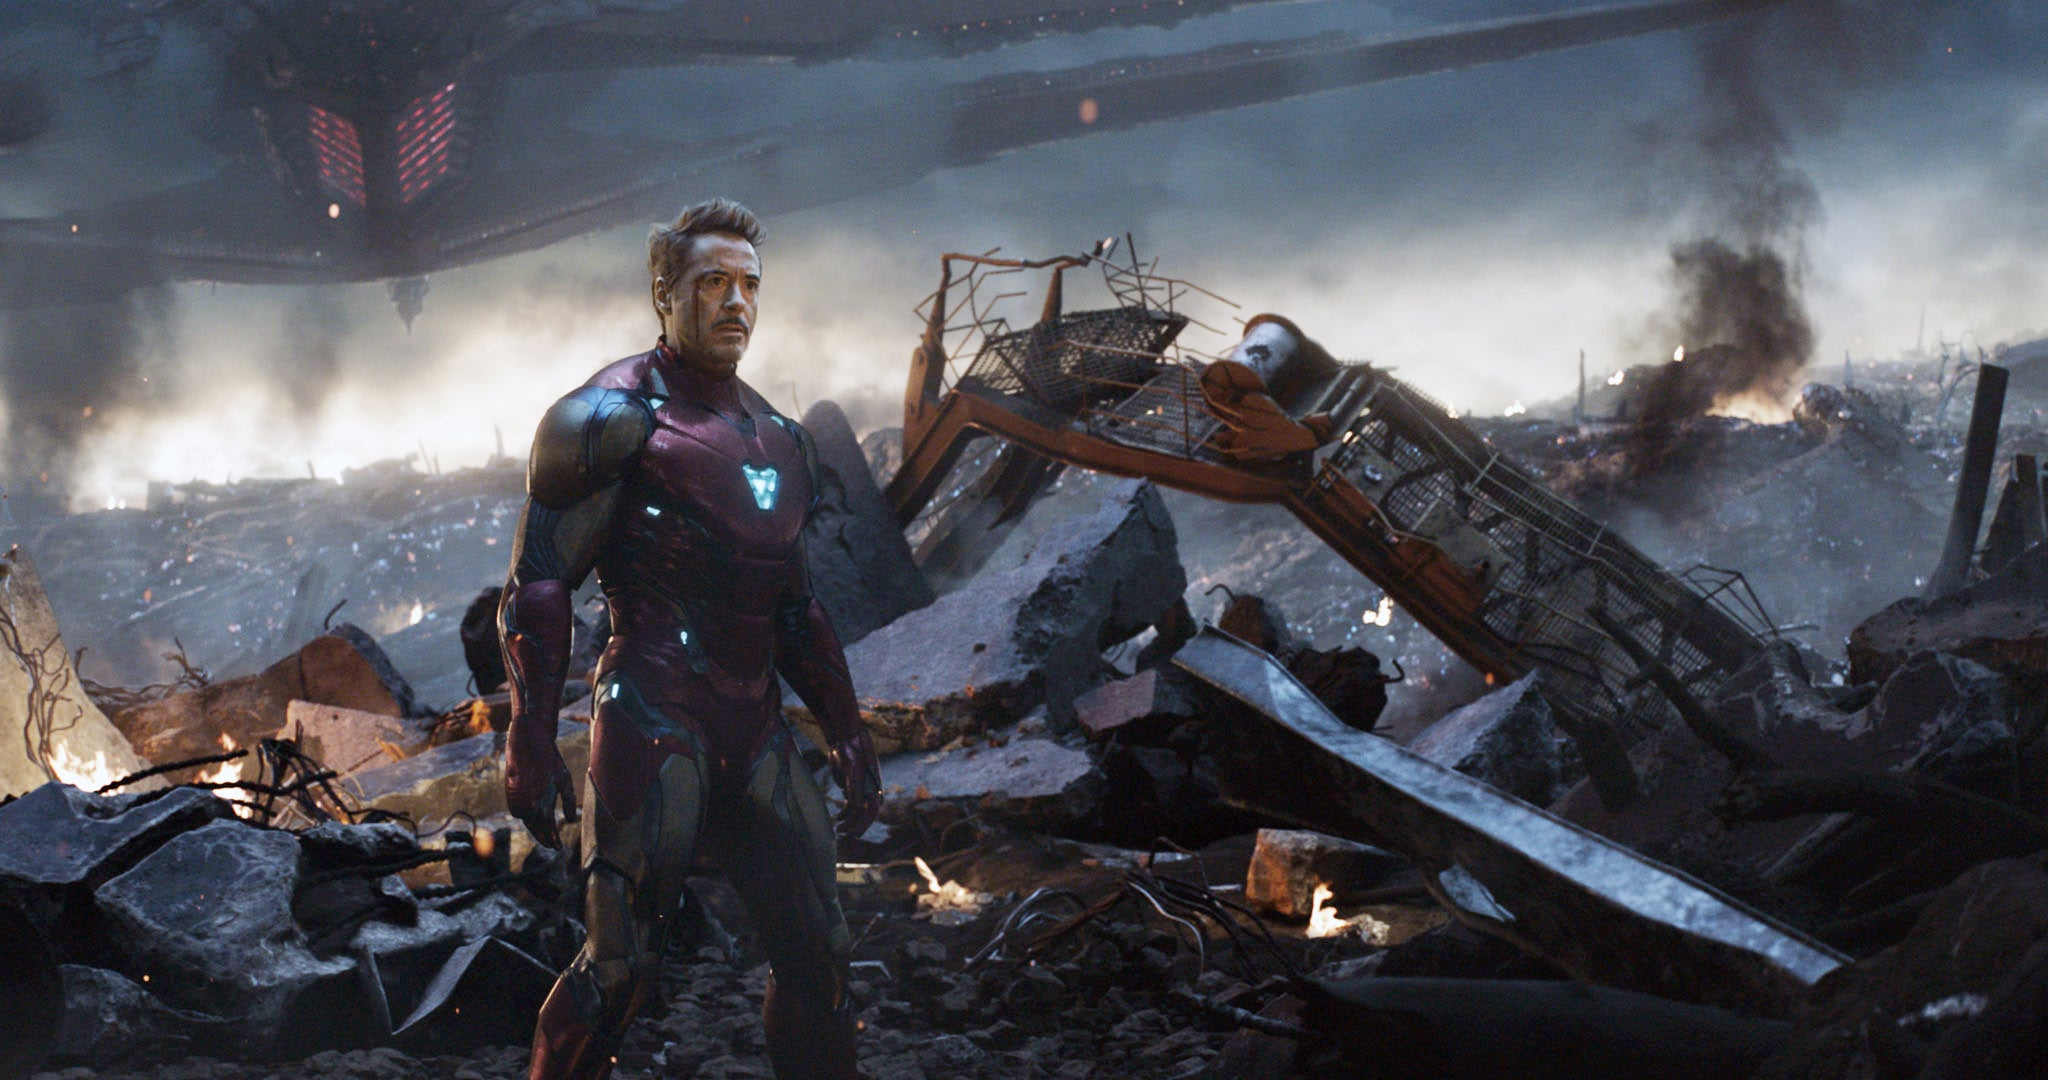 Avengers: Endgame' Just Added A Surprising New Post-Credits Scene